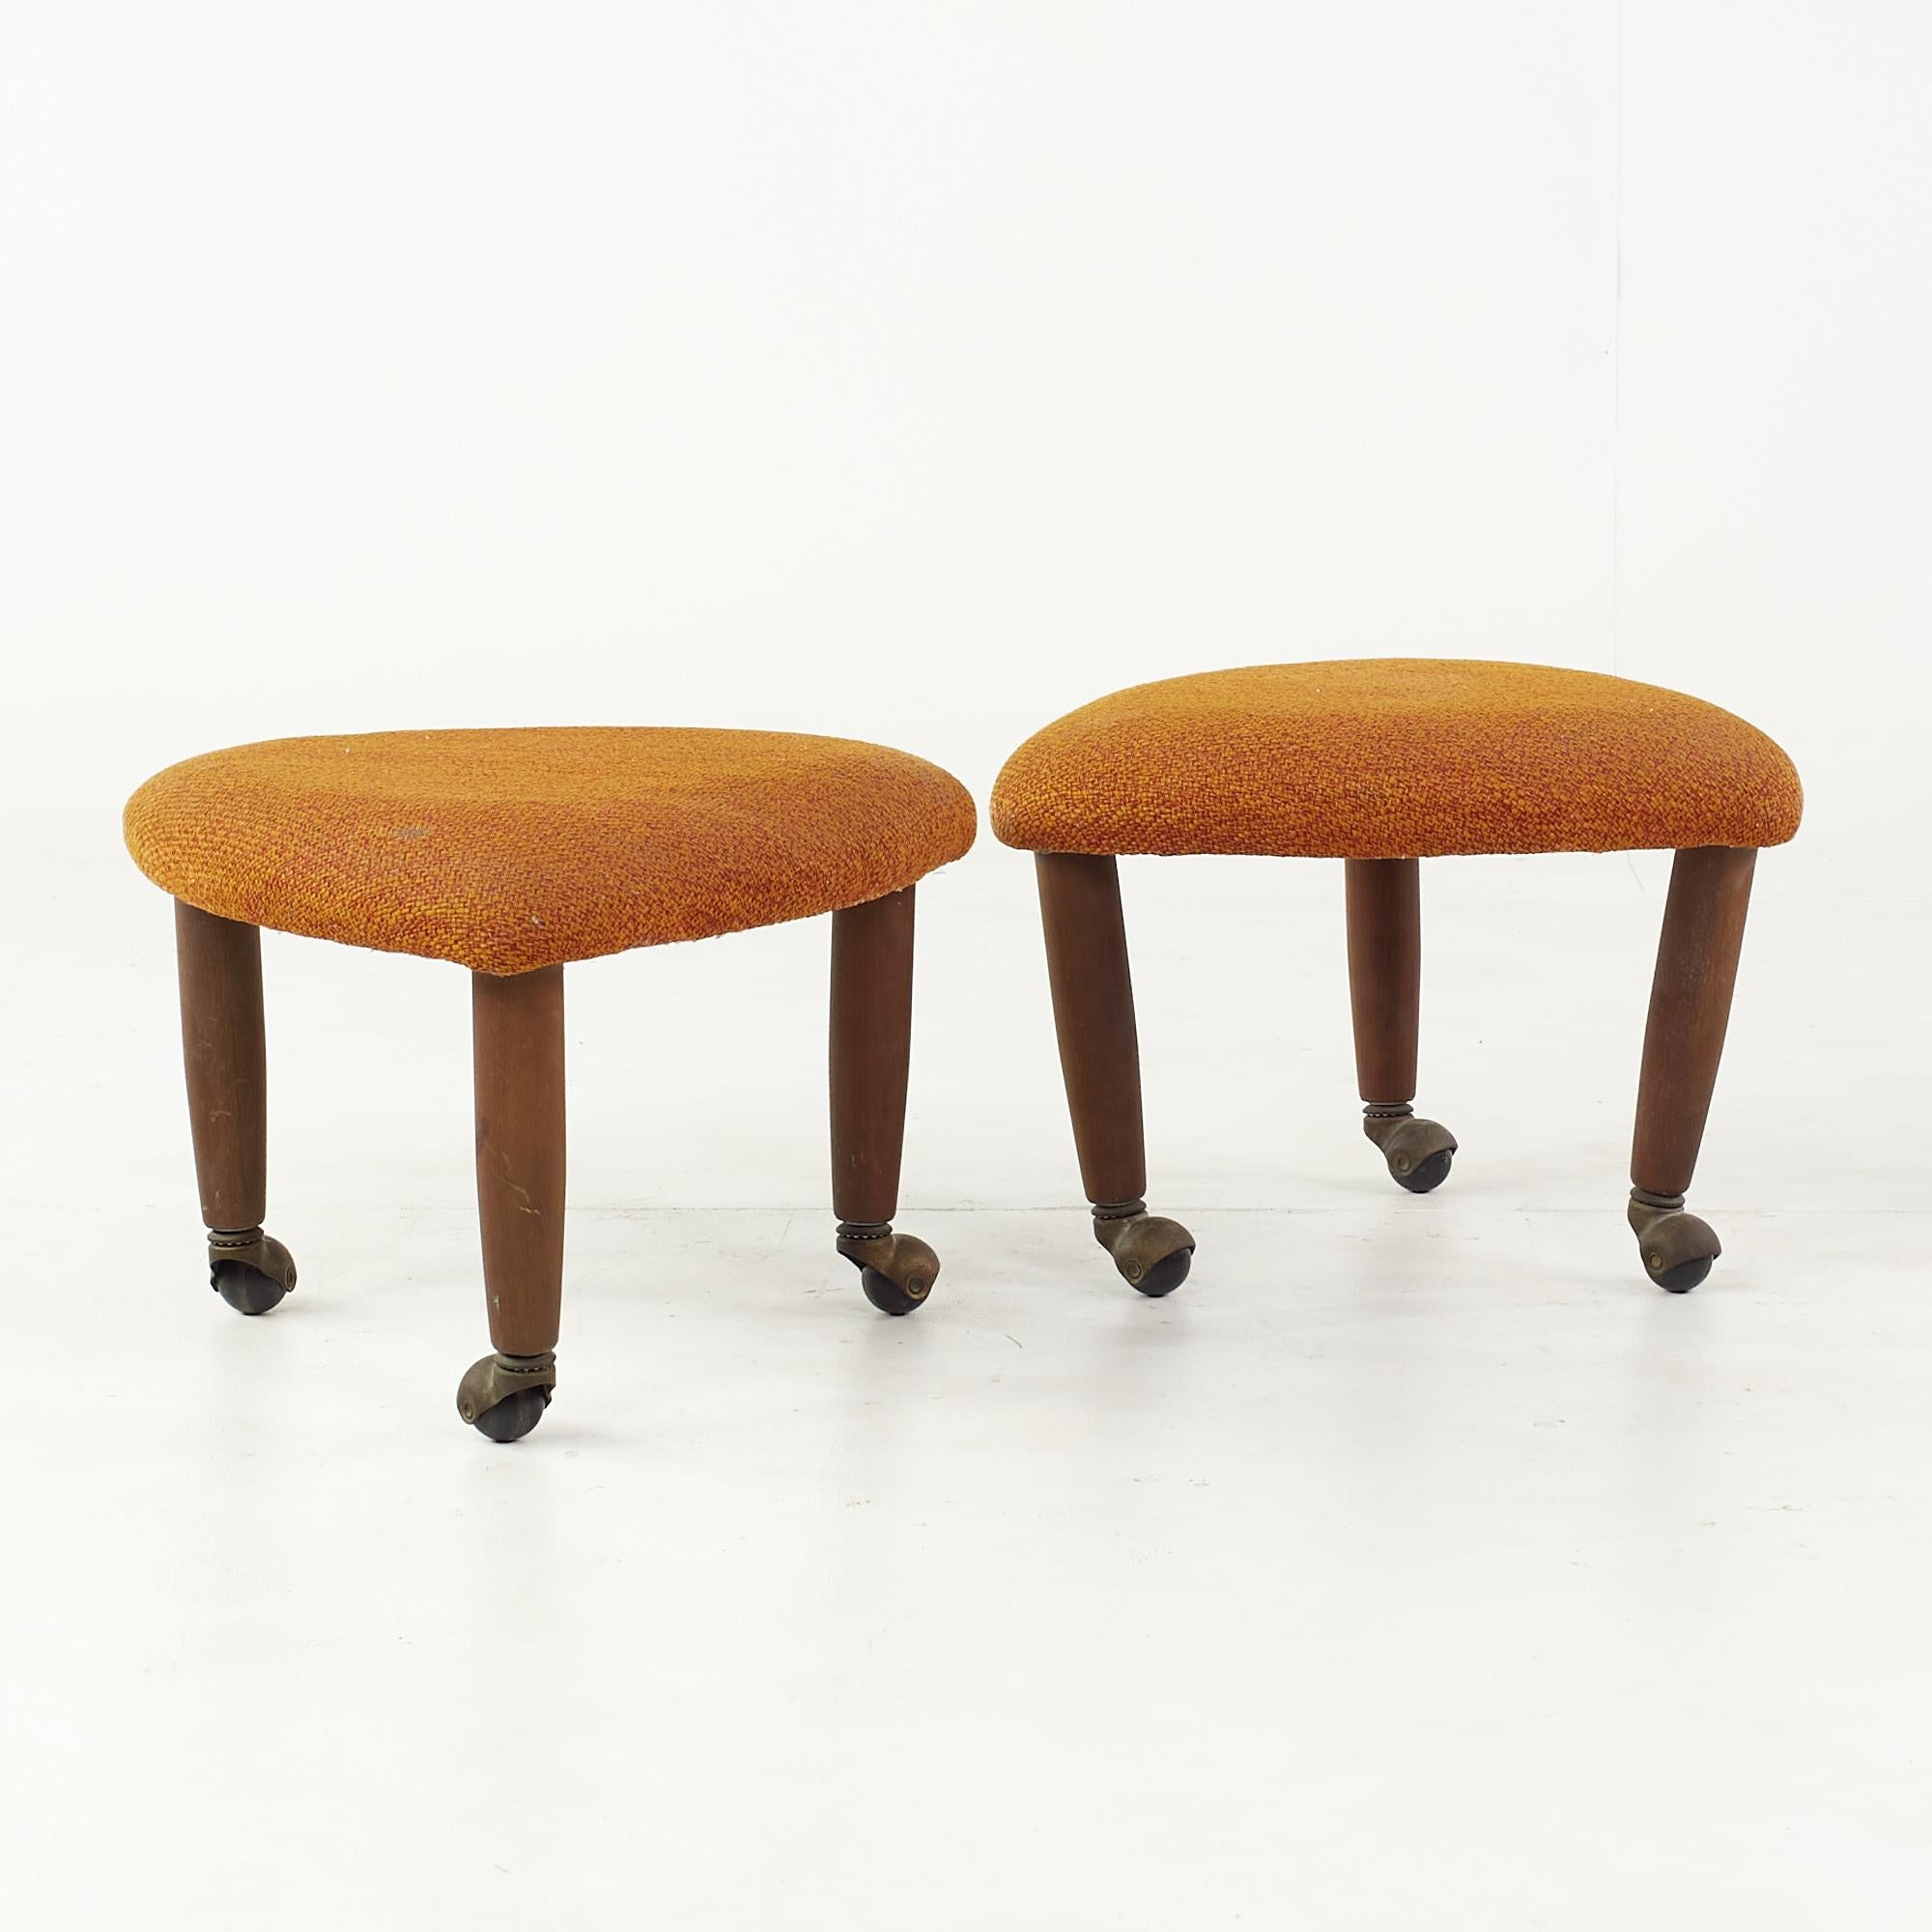 Adrian Pearsall for Craft Associates mid century ottomans - pair

Each ottoman measures: 18 wide x 18 deep x 13 inches high

All pieces of furniture can be had in what we call restored vintage condition. That means the piece is restored upon